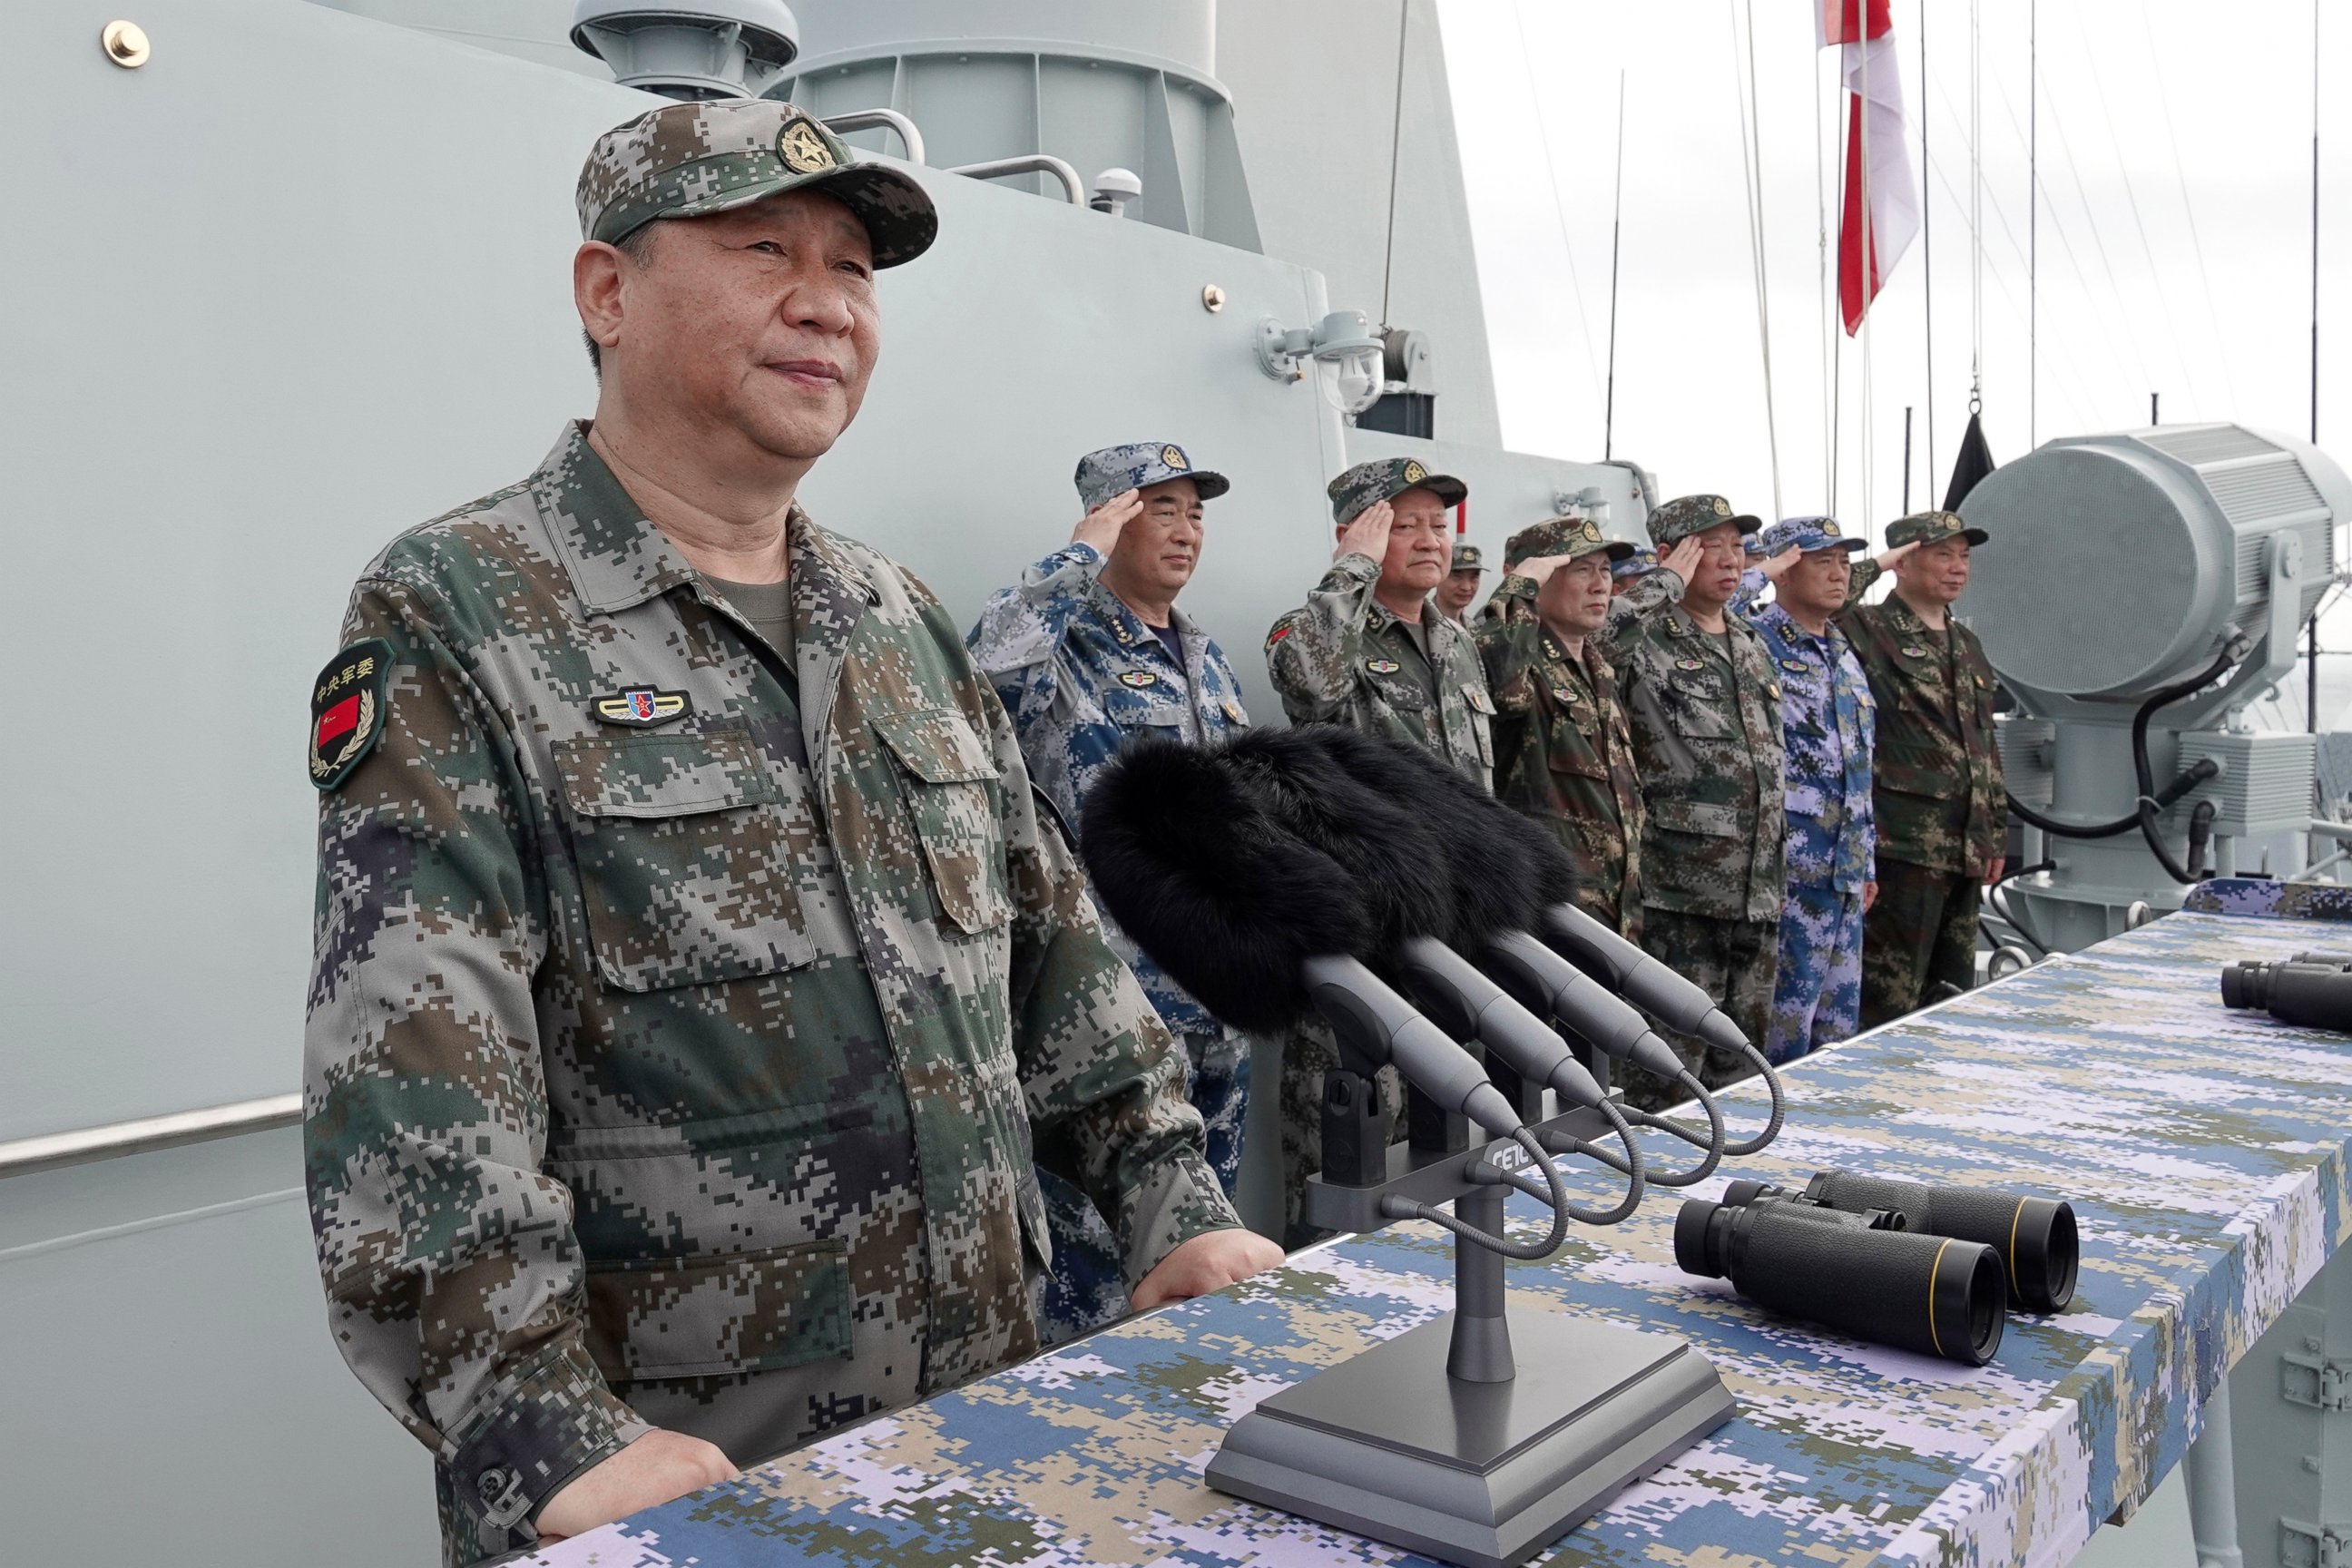 PHOTO: In this April 12, 2018, file photo released by Xinhua News Agency, Chinese President Xi Jinping speaks after reviewing the Chinese People's Liberation Army (PLA) Navy fleet in the South China Sea.